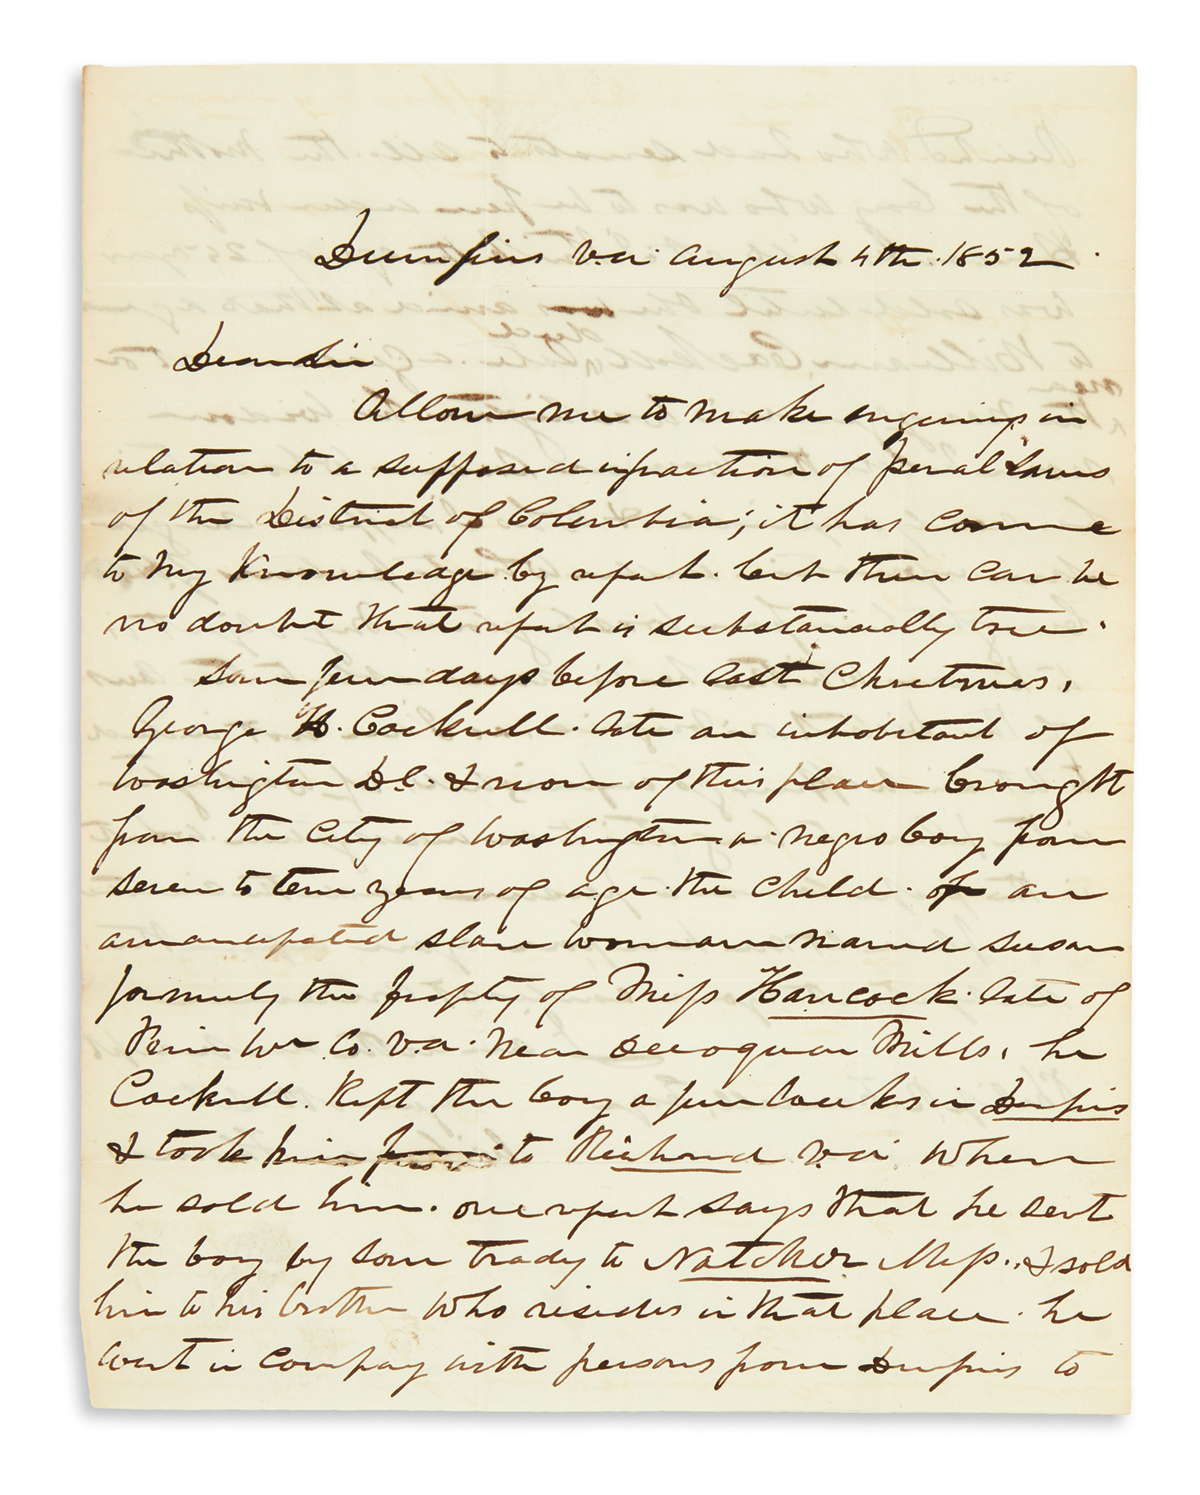 (SLAVERY AND ABOLITION.) Thomas, William. Letter on the abduction and sale of a free African American boy from the District of Columbia